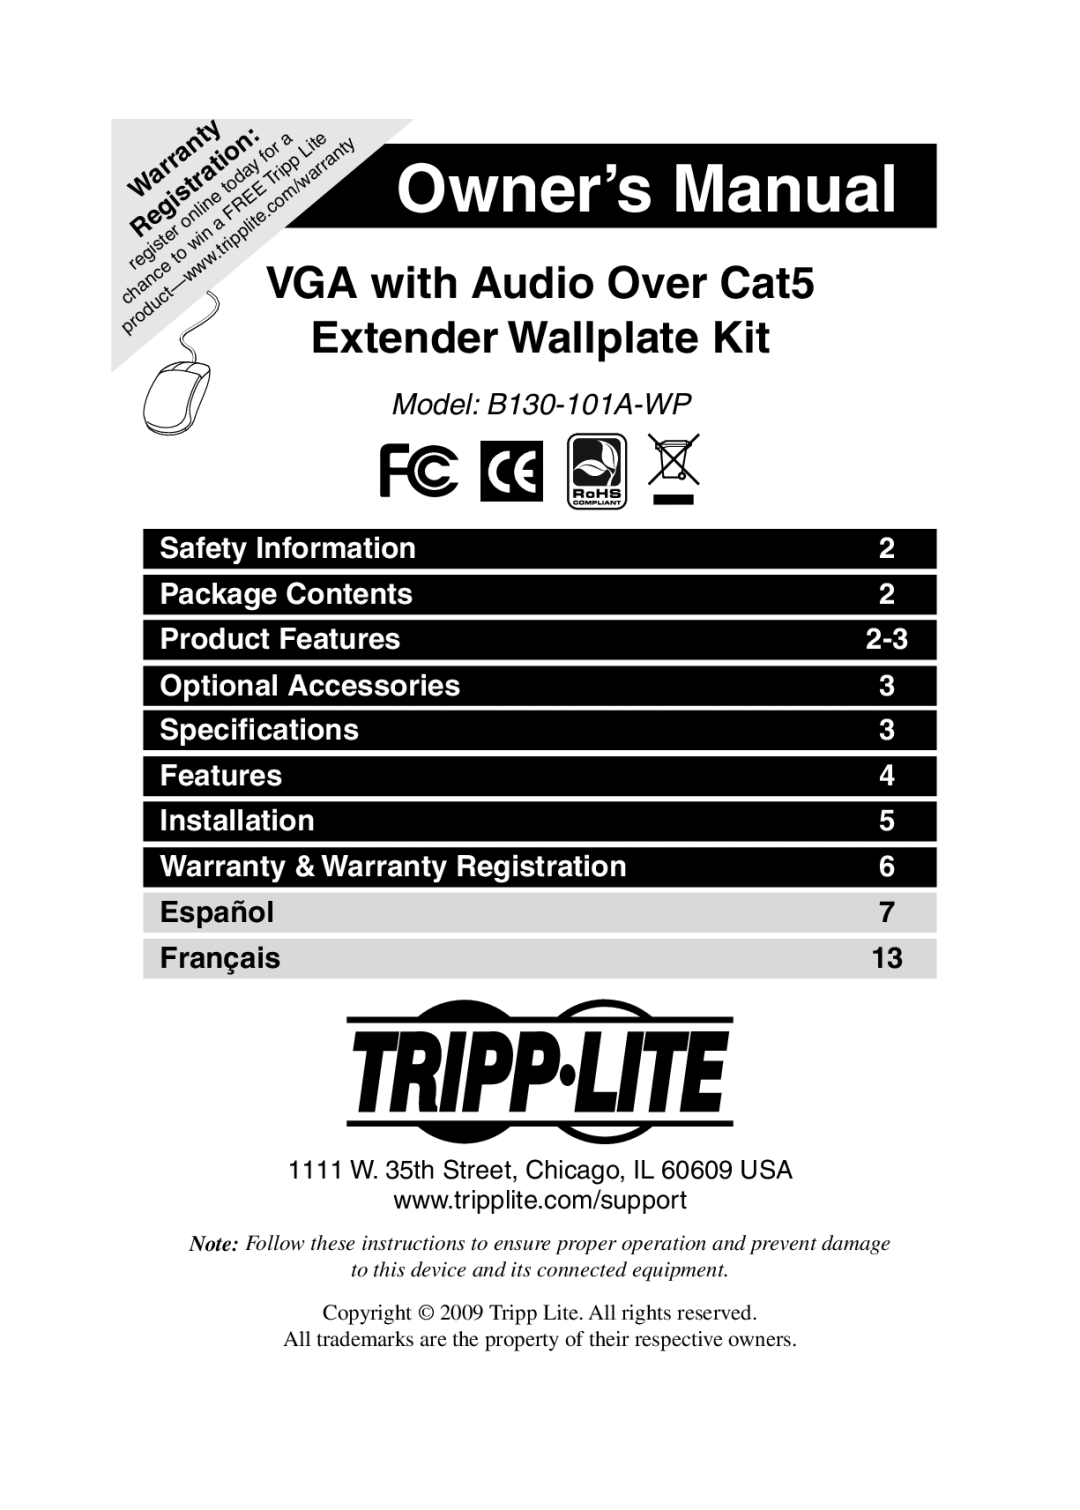 Tripp Lite B130-101A-WP owner manual Safety Information, Package Contents, Product Features, Optional Accessories, Español 